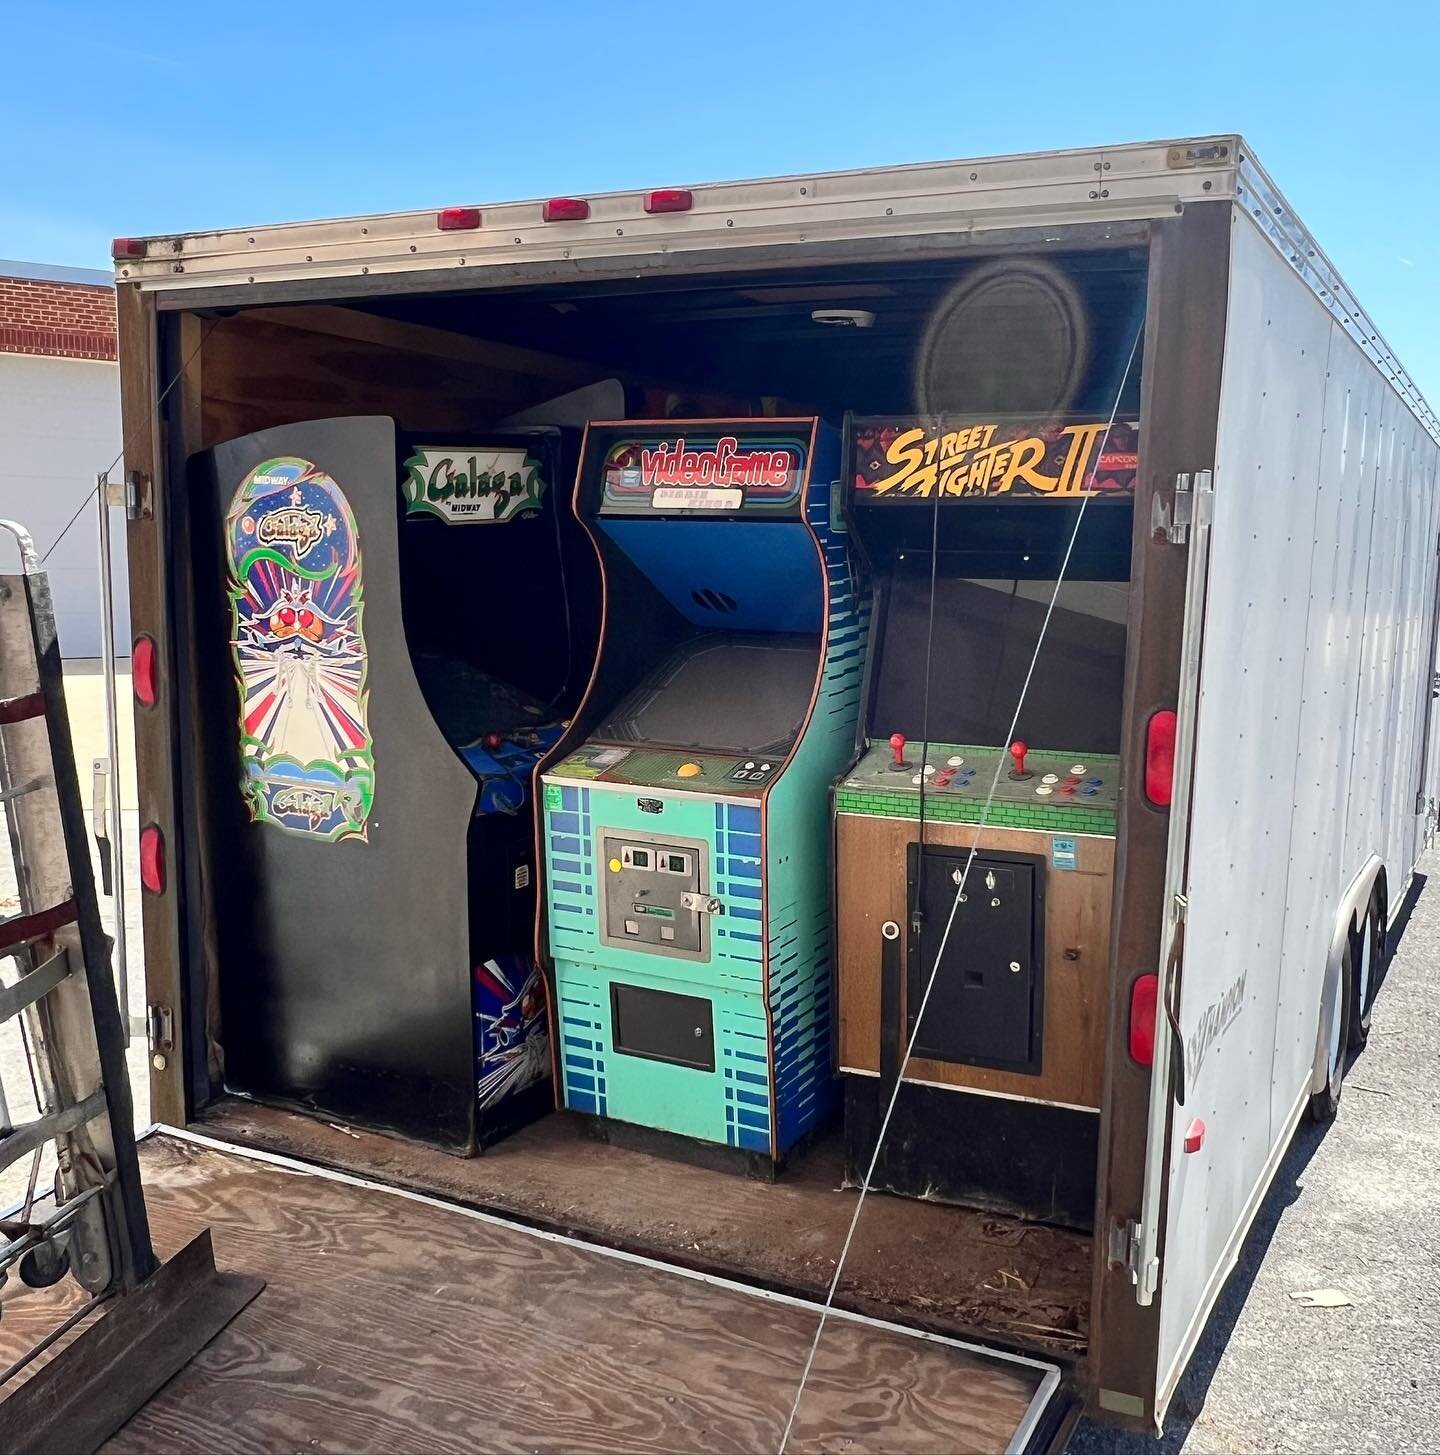 Our March Auction is OPEN FOR BIDDING and we&rsquo;ve still got more coming in 🤩 - link in bio to register and bid! 
.
#arcade #vintageadvertising #pinball #gameroom #onlineauctionhouse #jaybirdauctions